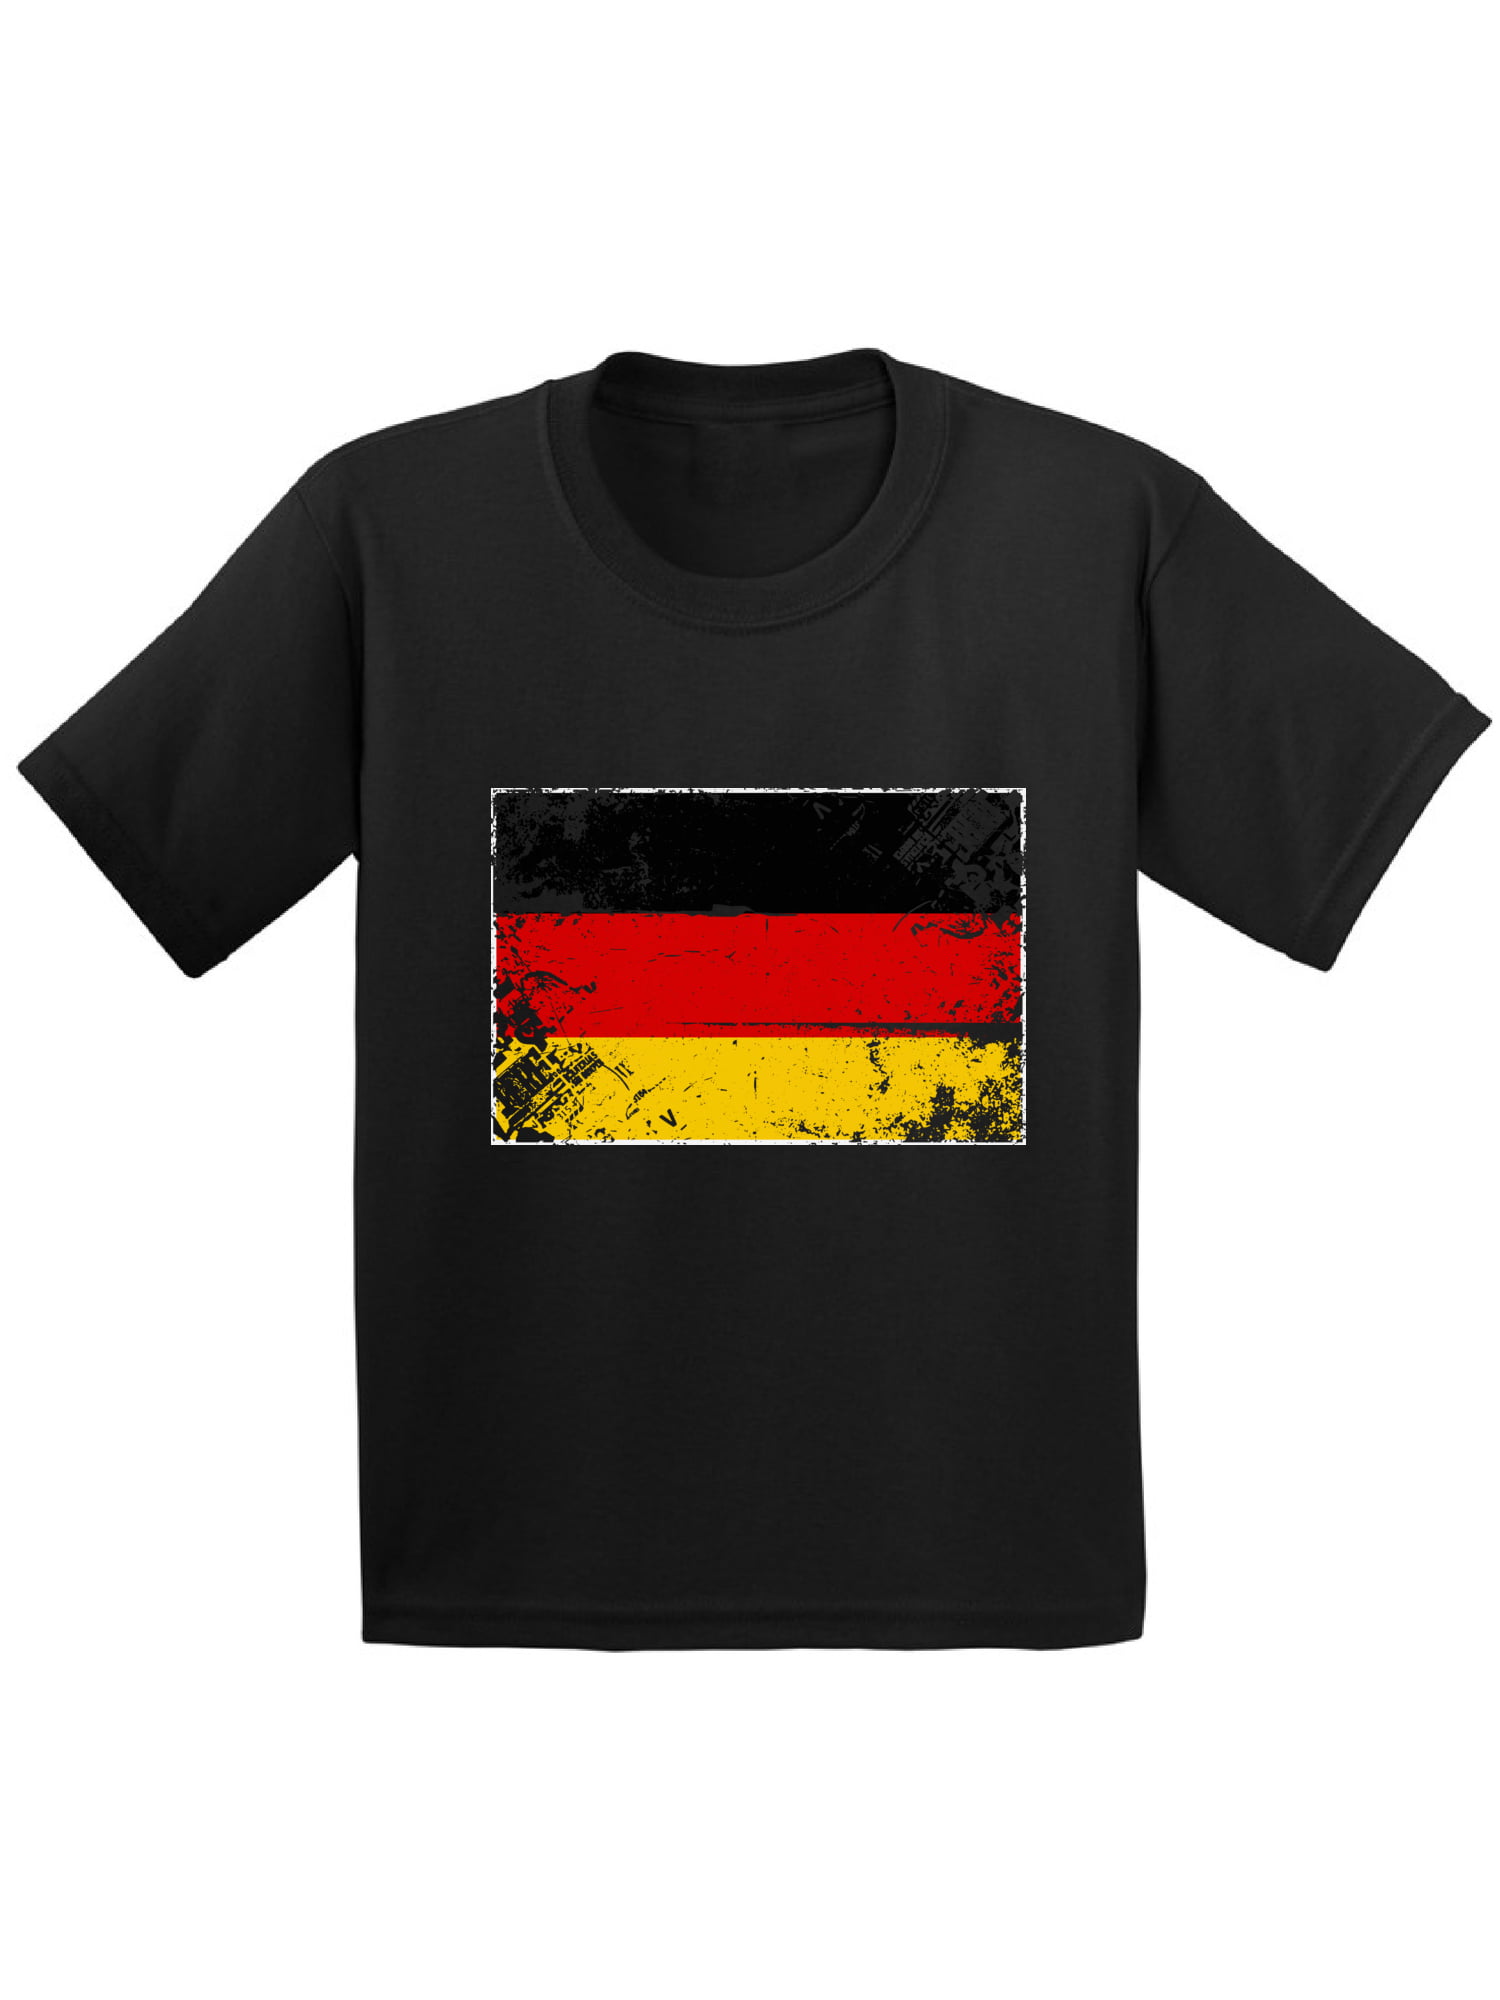 GERMANY MIXED WITH Kids T-shirt German Gift Idea Unisex Youth Shirt Food Lover Toddler Tee